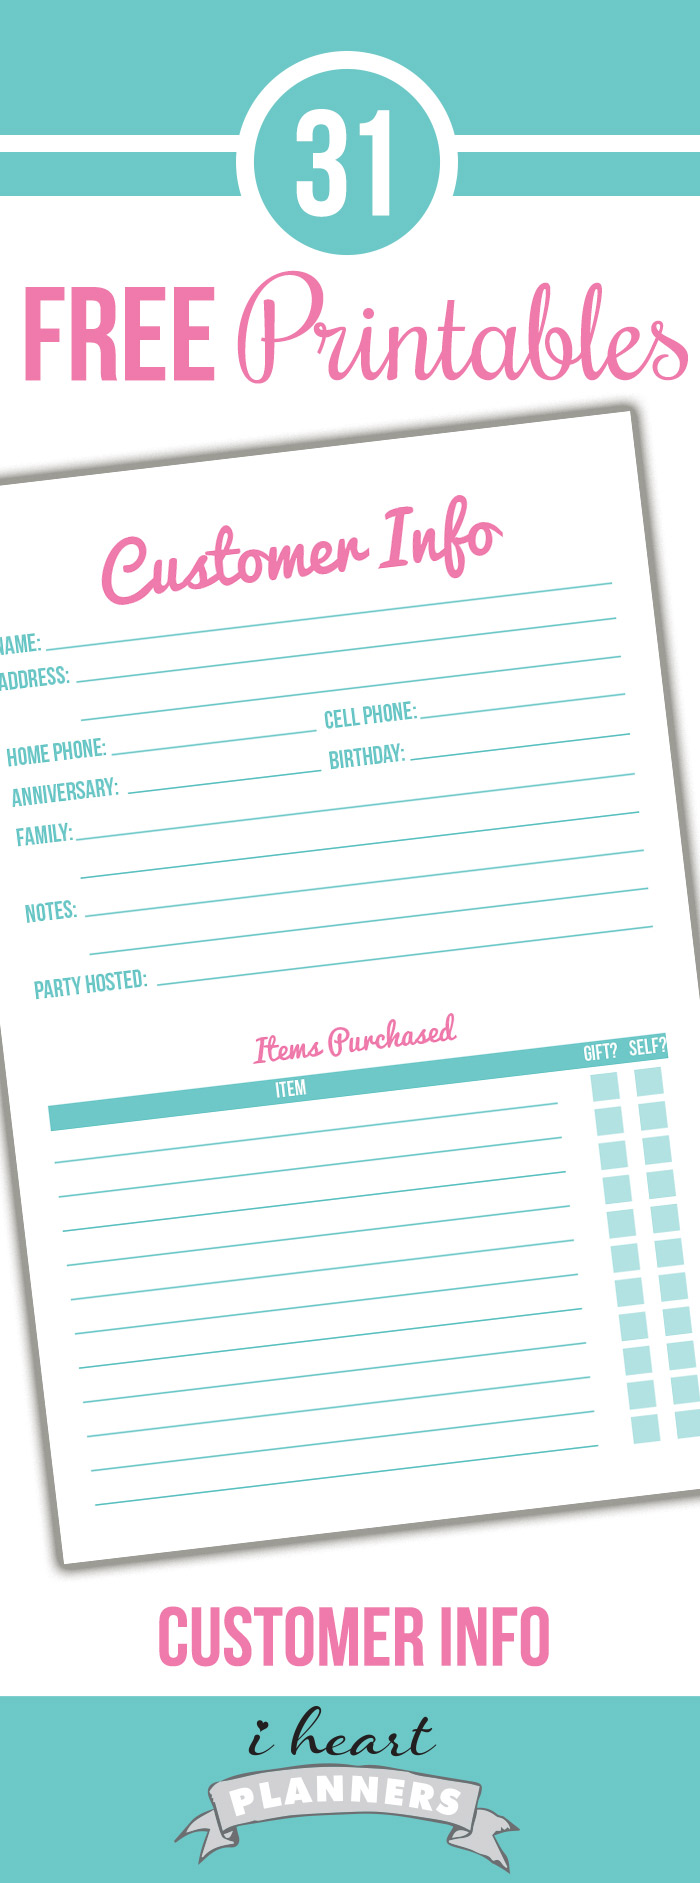 Free direct sales printable for customer information. This would be great for your direct sales planner. While it would work well in any direct sales business, it's in the Origami Owl color scheme.